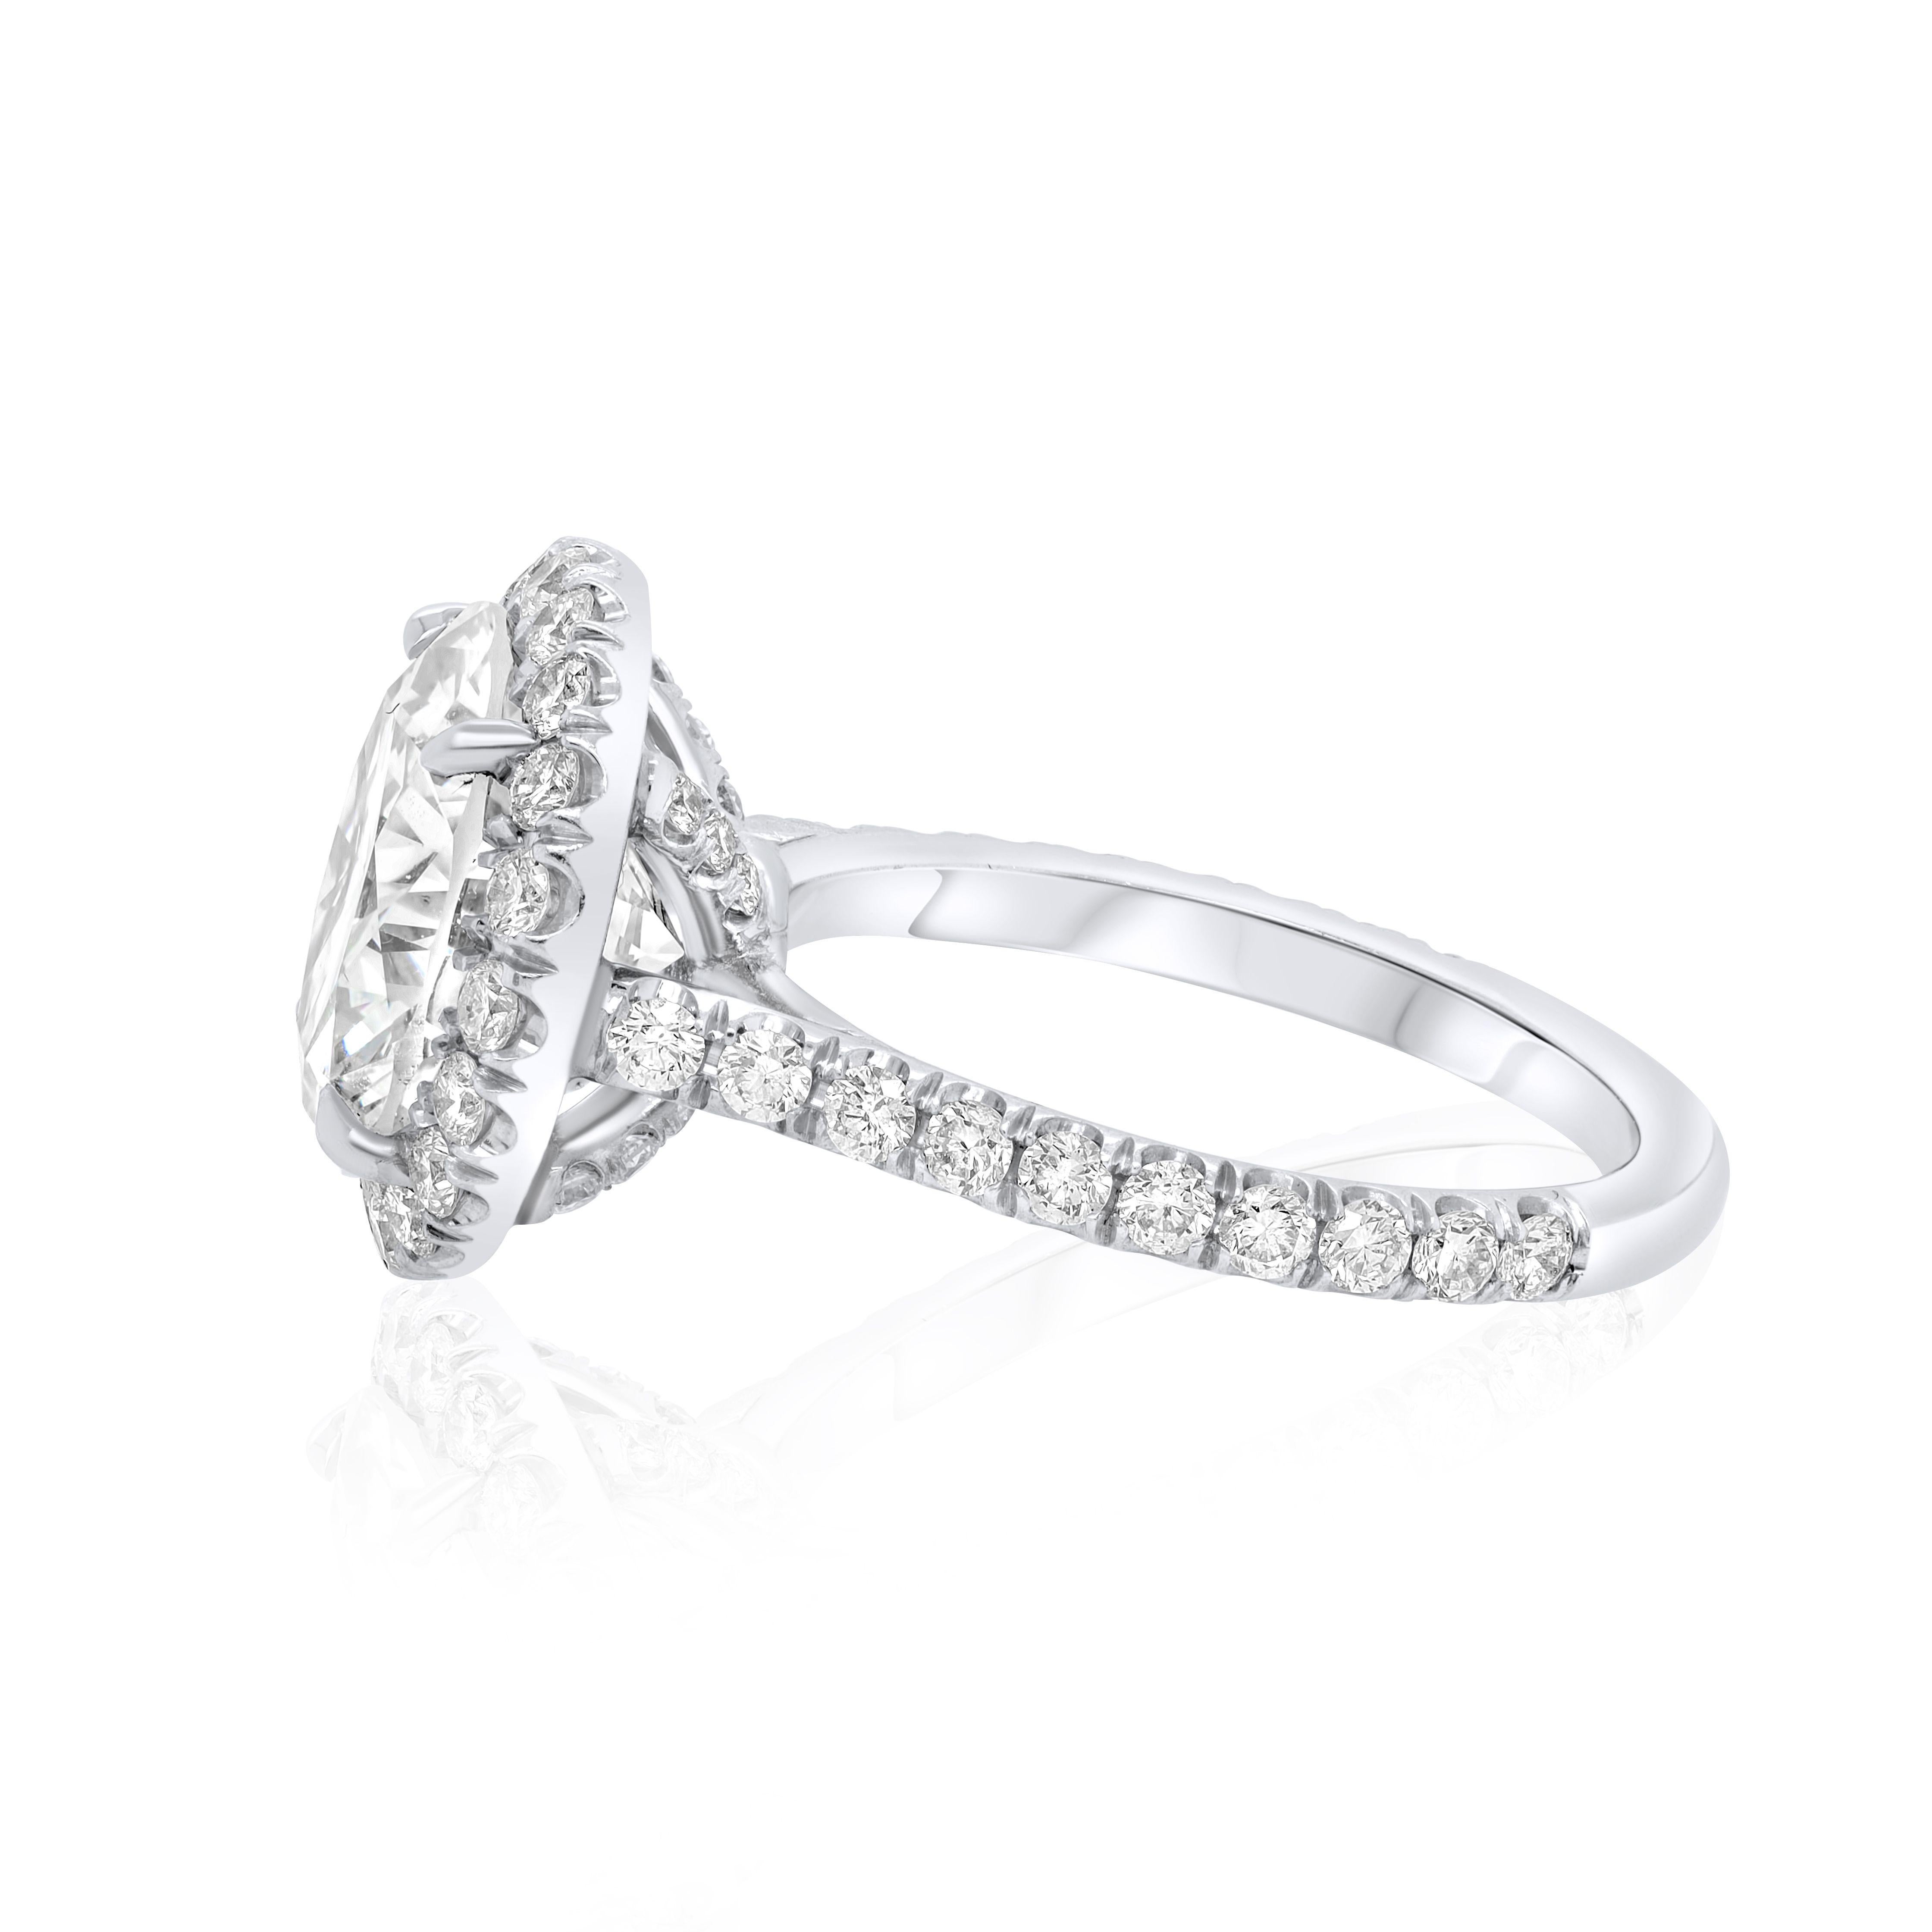 Women's 4.54 Carat Diamond Ring in Platinum Setting with Micropave Diamonds For Sale